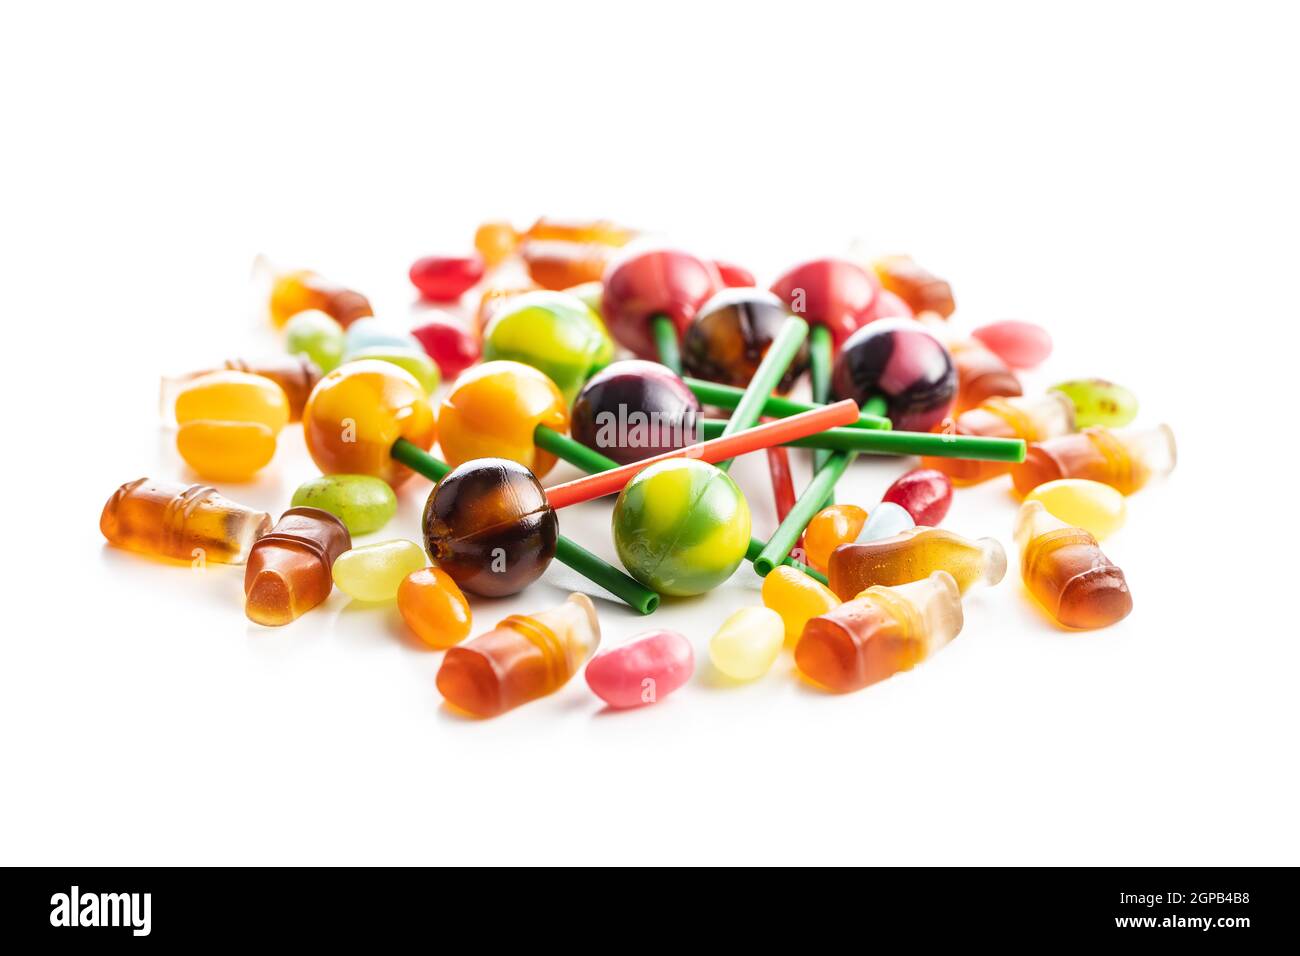 Various colorful candies. Lollipops, jelly beans and gummy bonbons isolated on white background. Stock Photo